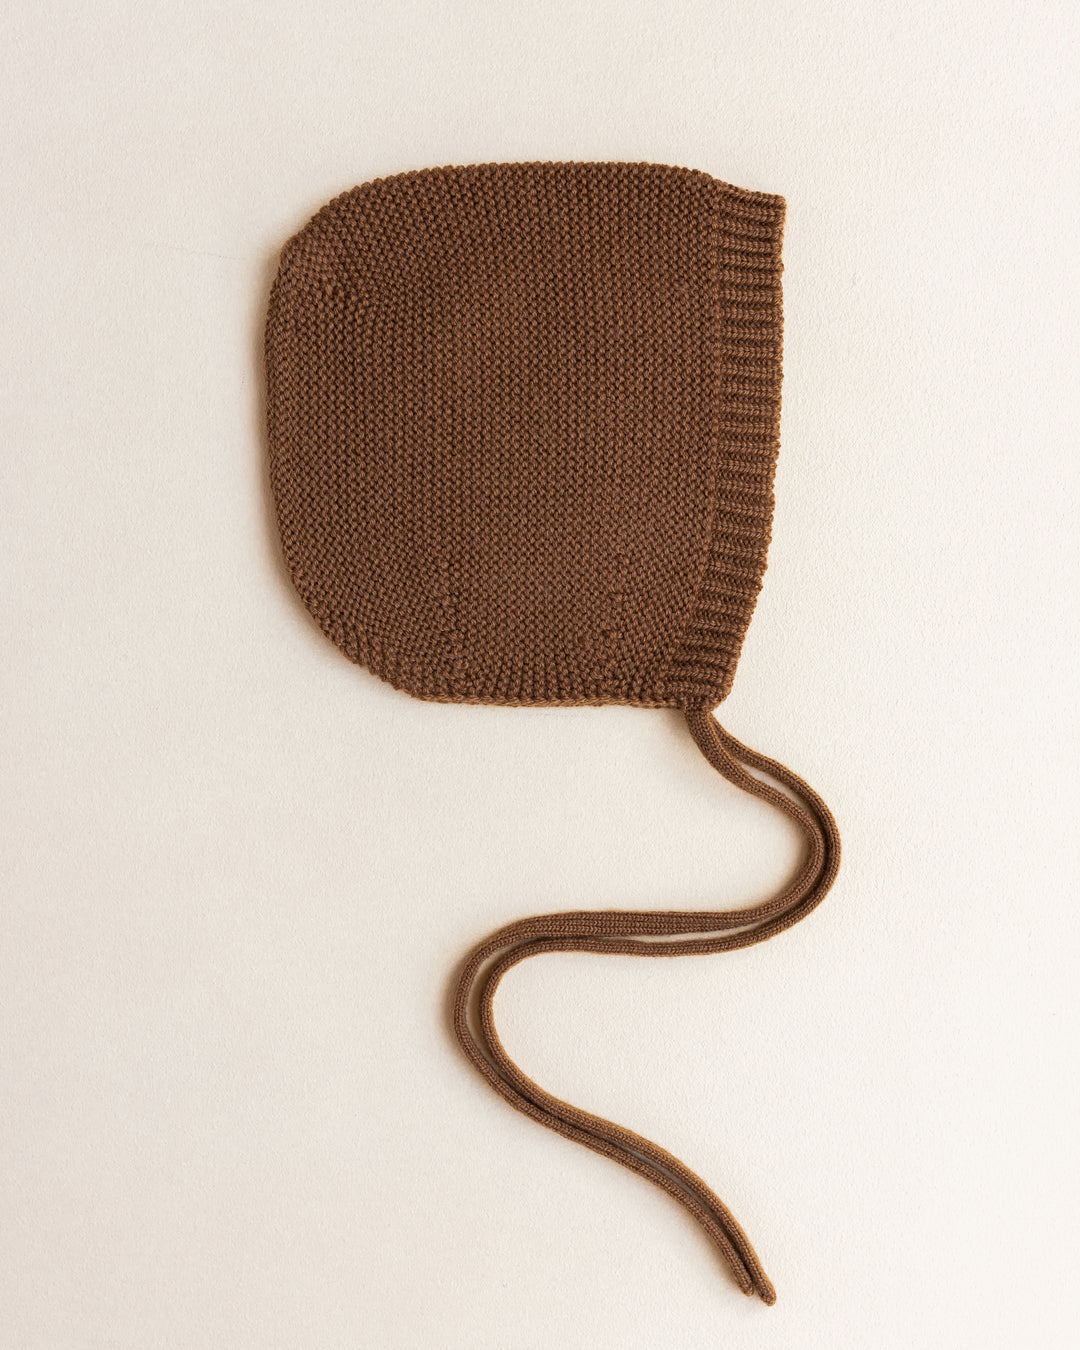 Dolly Knitted Bonnet - Chocolate